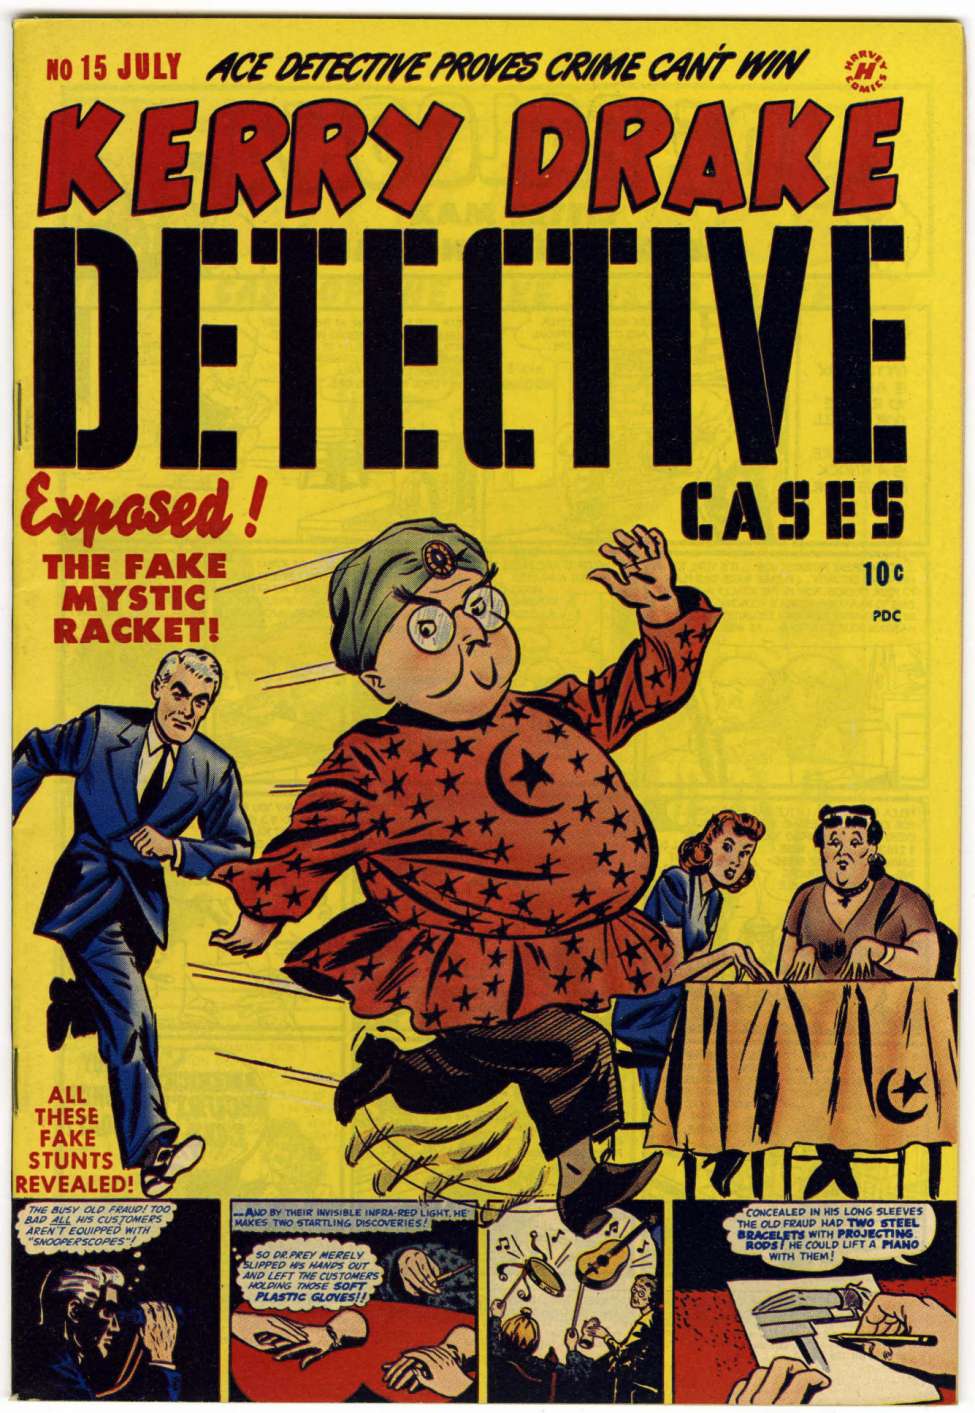 Comic Book Cover For Kerry Drake Detective Cases 15